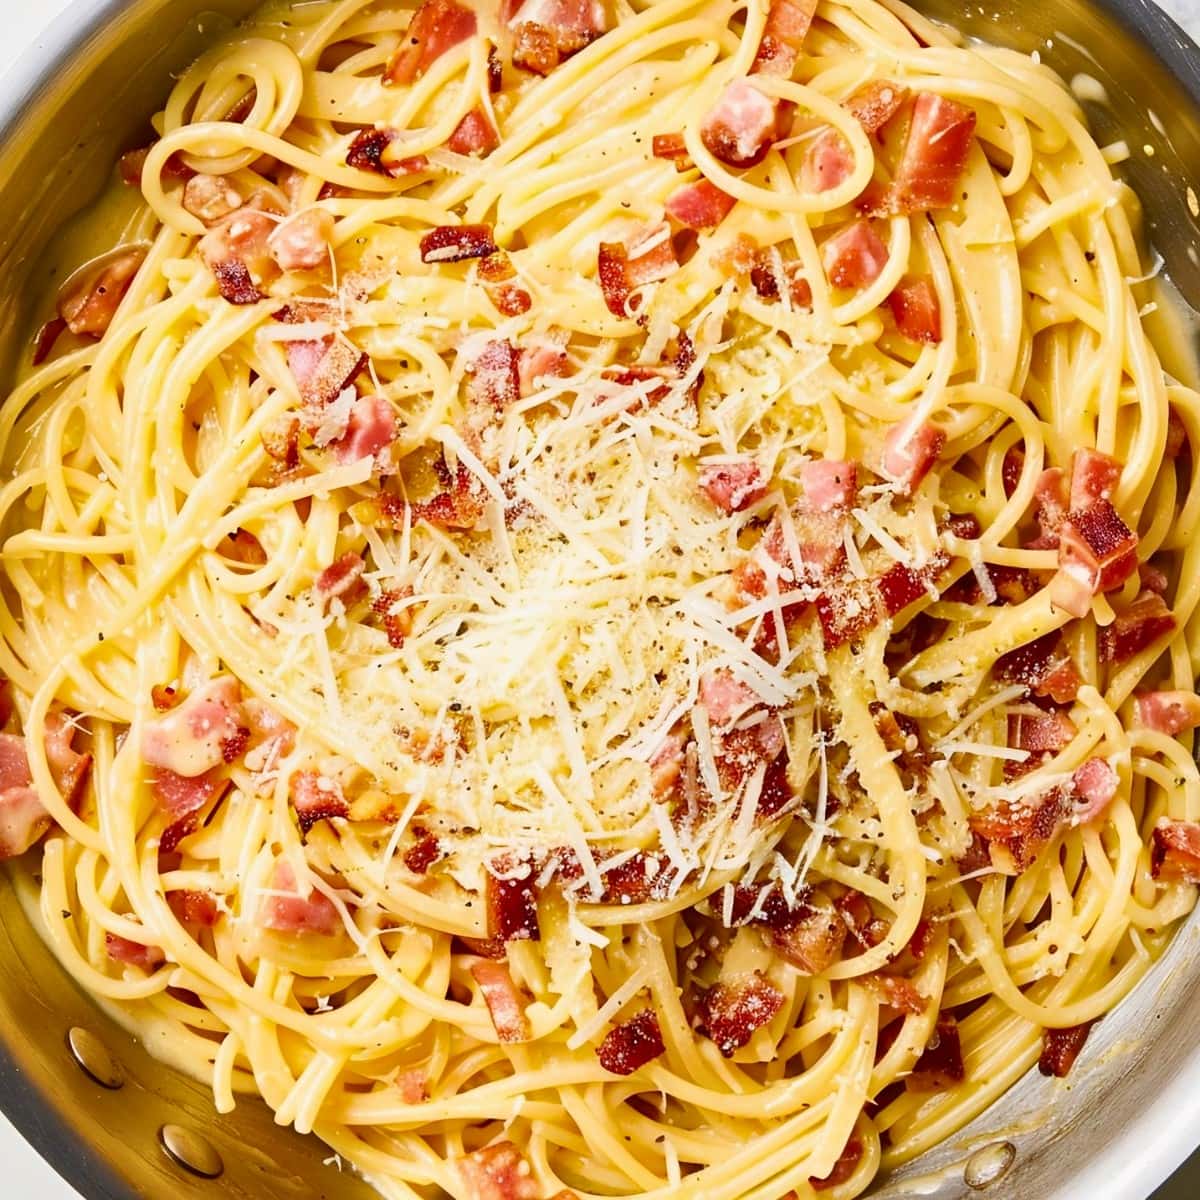 Top View of Fresh Pasta Carbonara in a Frying Pan with Bacon, Spaghetti Noodles, and Parmesan Cheese